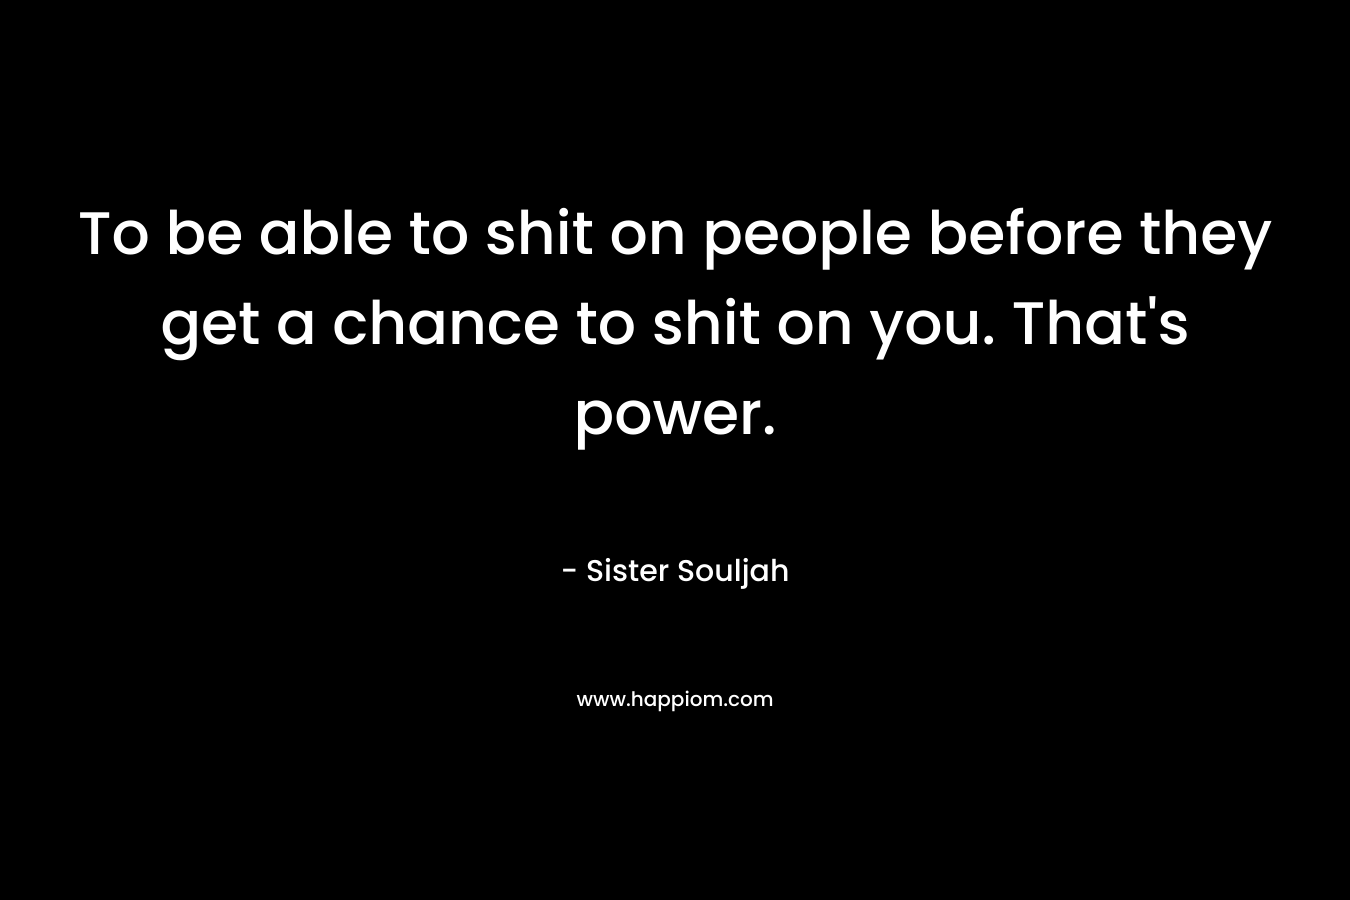 To be able to shit on people before they get a chance to shit on you. That's power.